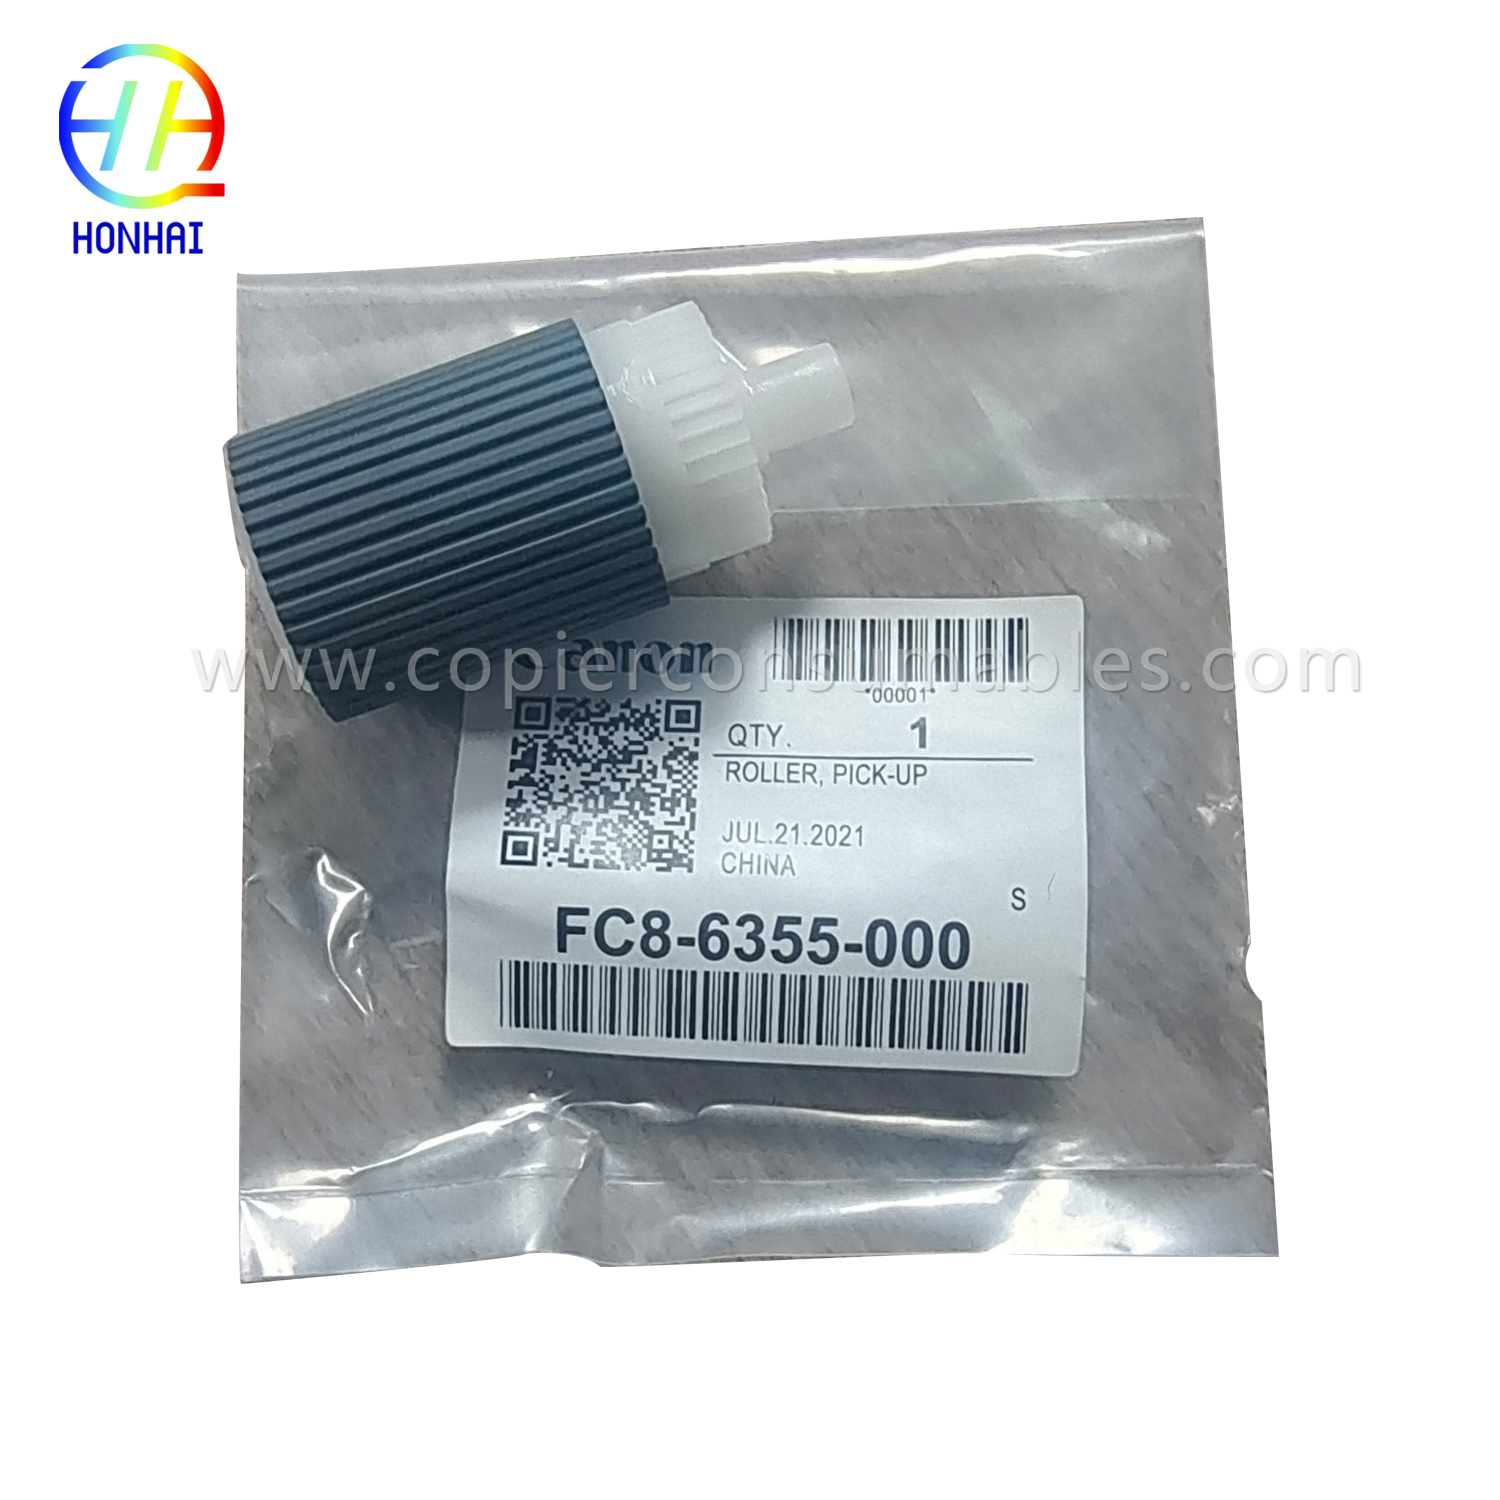 Pickup Roller para sa Canon Imagerunner Advance 4025 4035 4045 4051 4225 4235 4245 4251 400if 500if C2020 C2030 FC86355000 FC8-6355-000 OEM